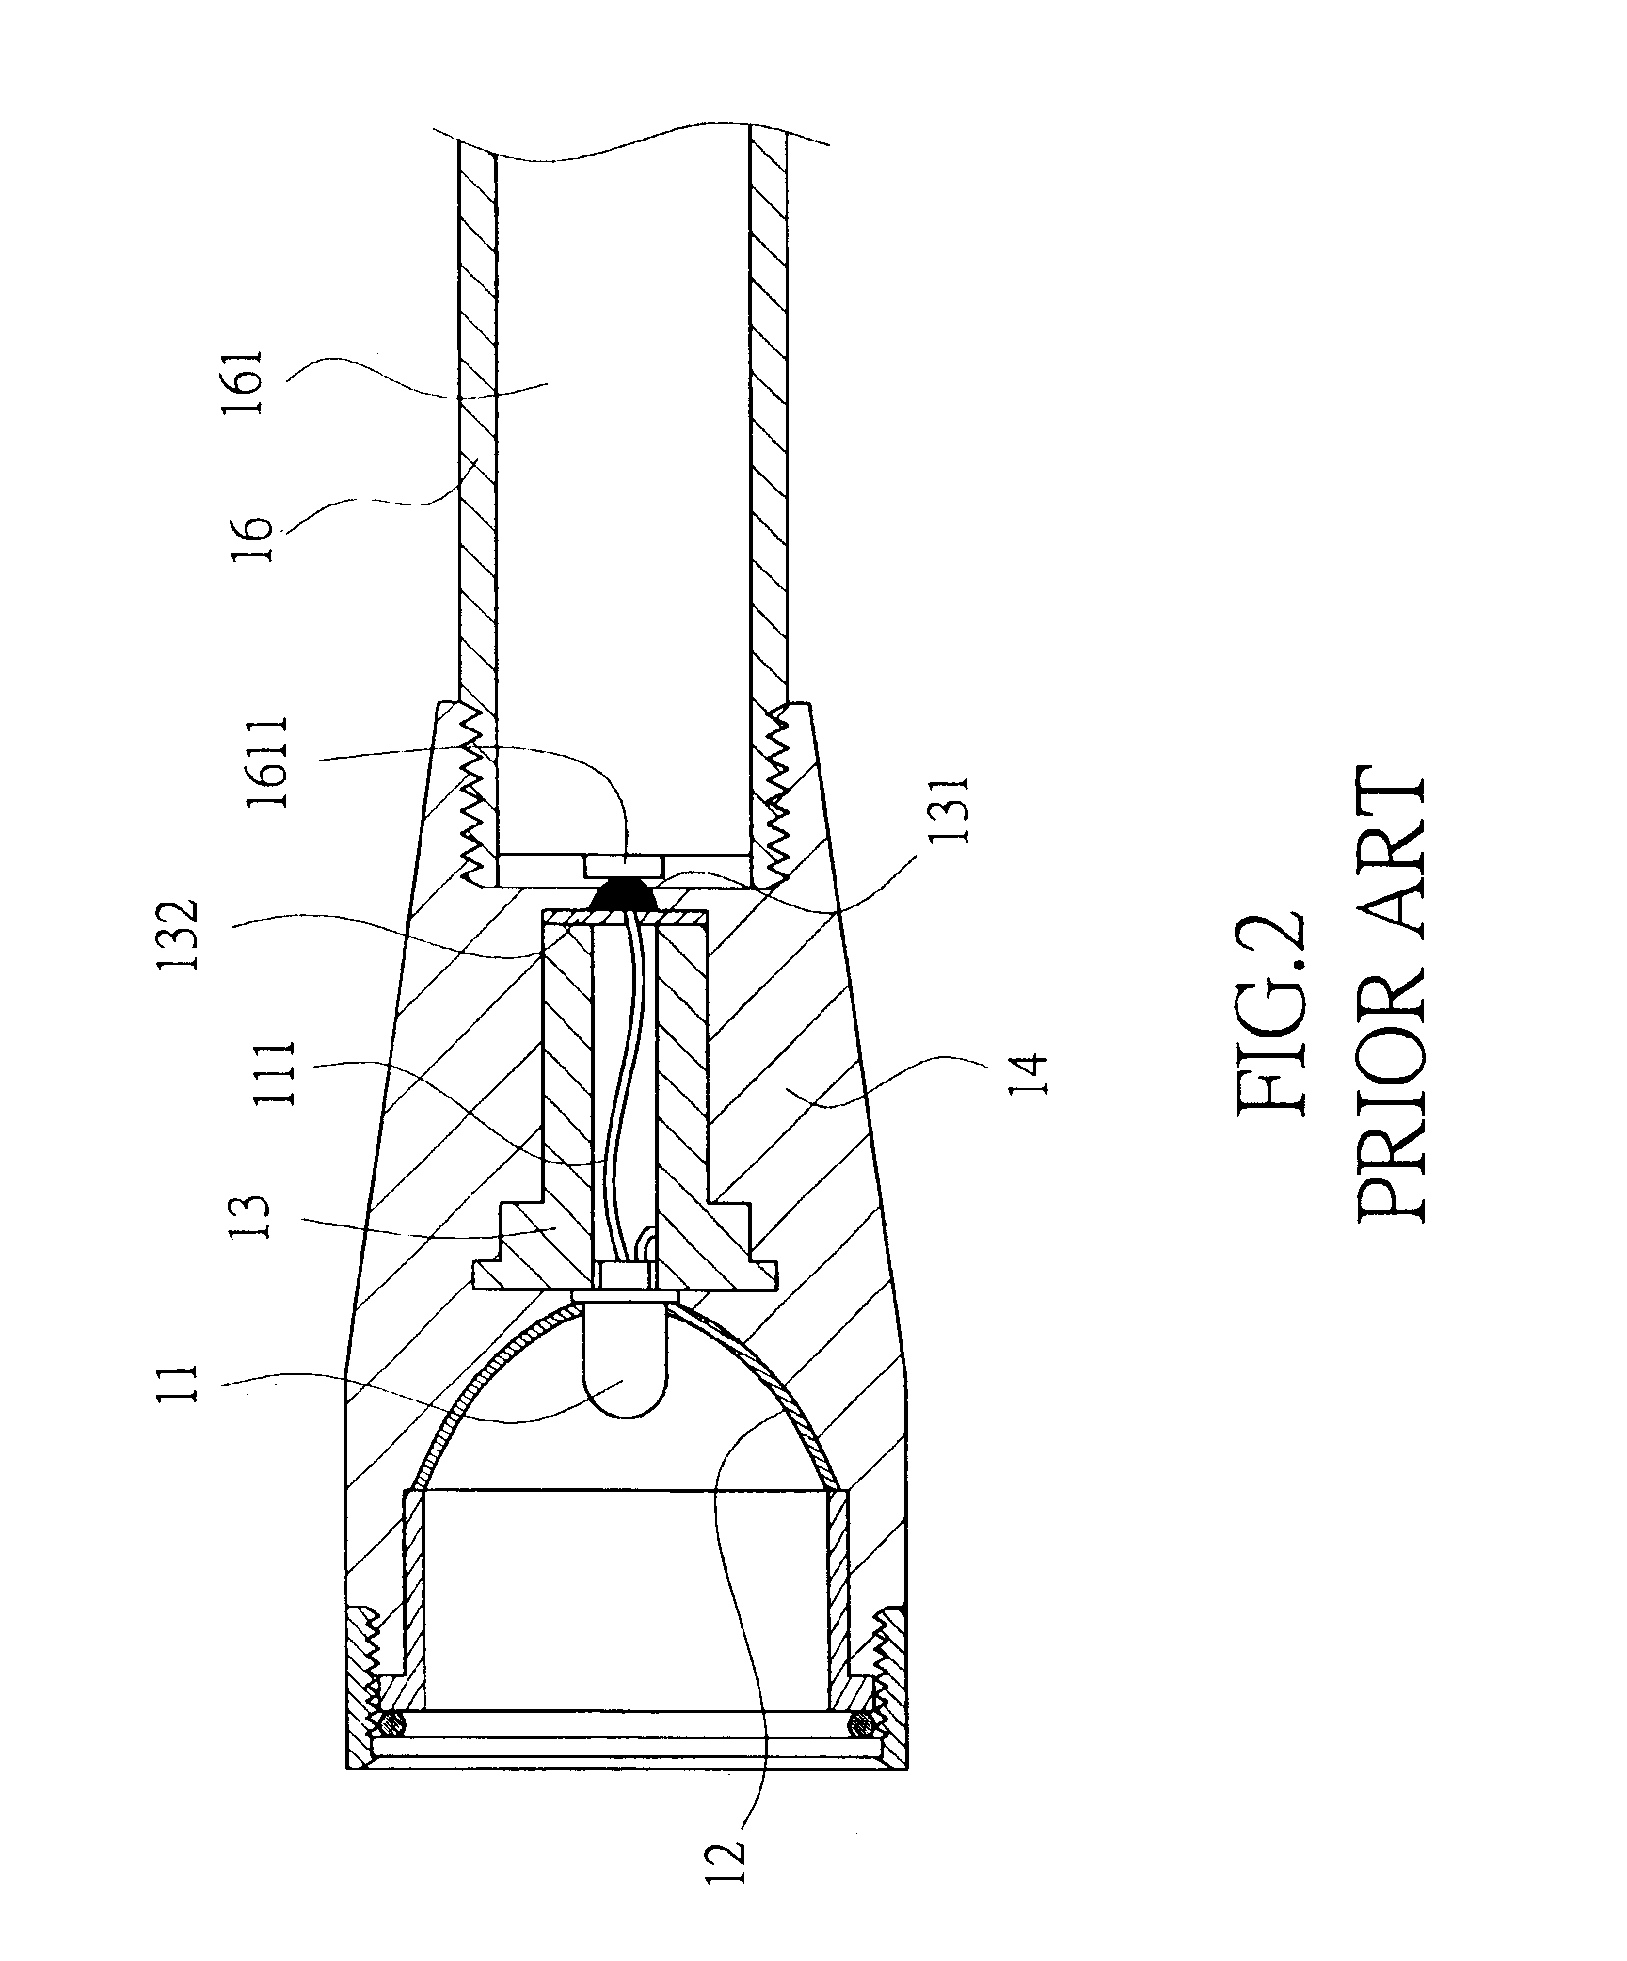 Flashlight with heat-dissipation device